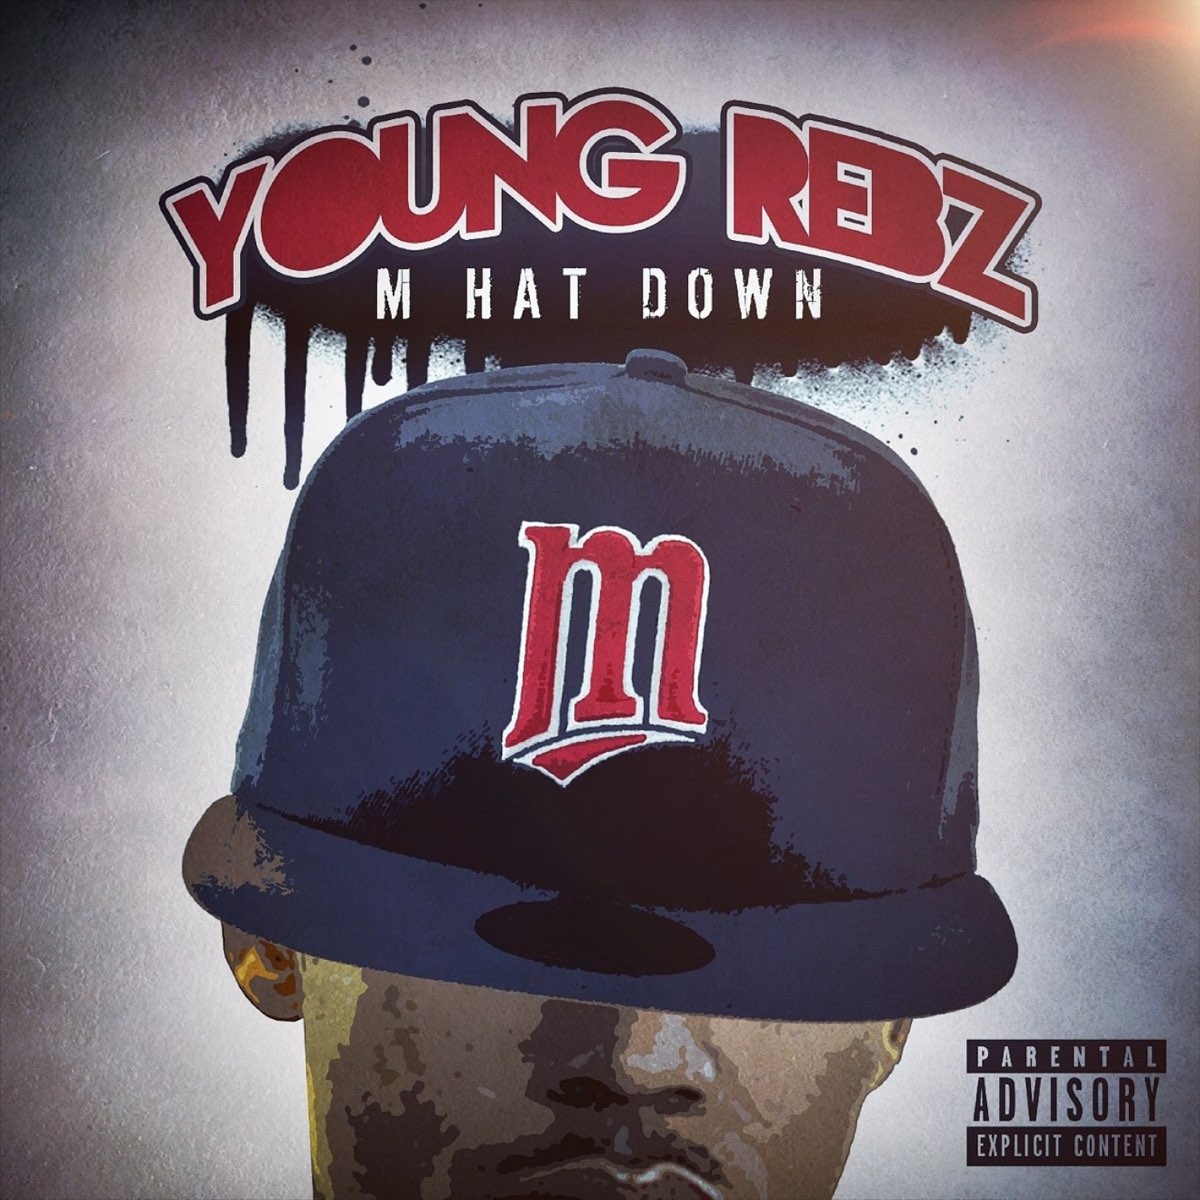 Young Rebz - M Hat Down